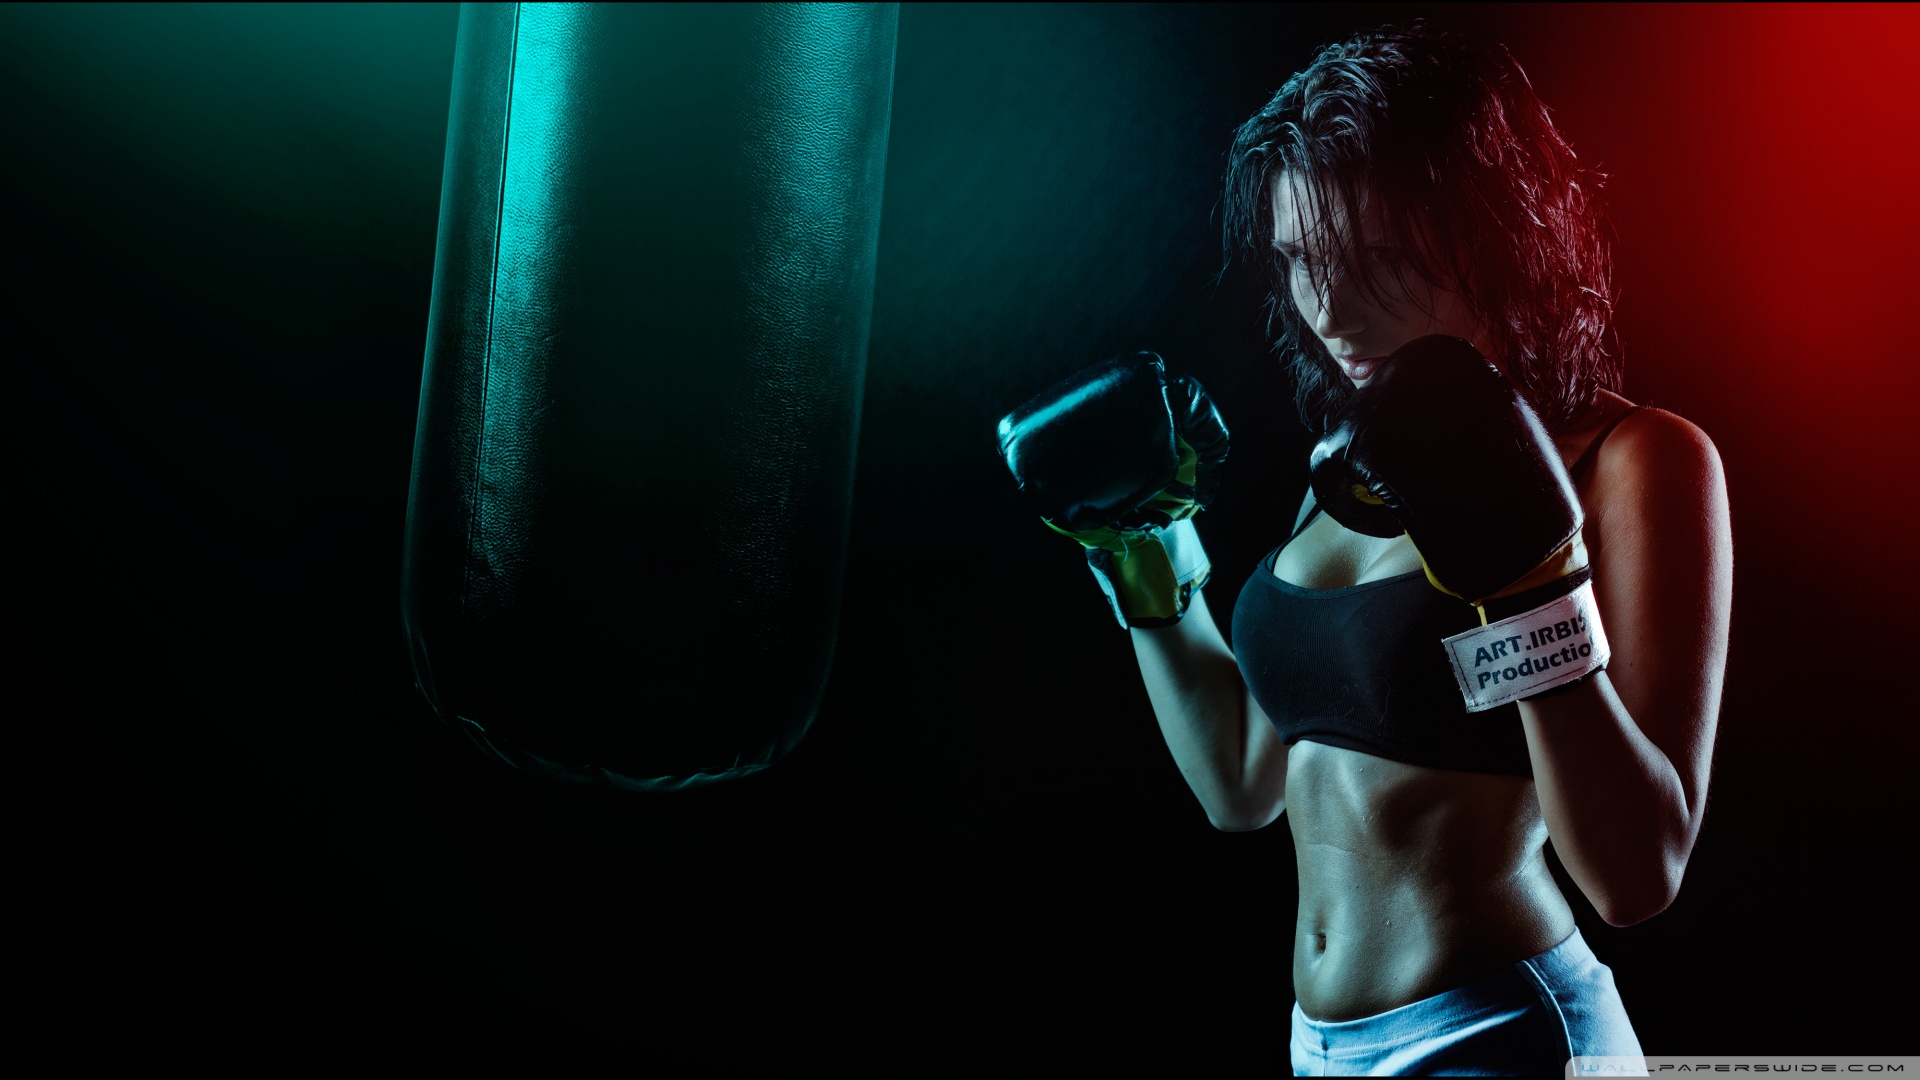 sport girl wallpaper,microphone,audio equipment,performance,photography,muscle